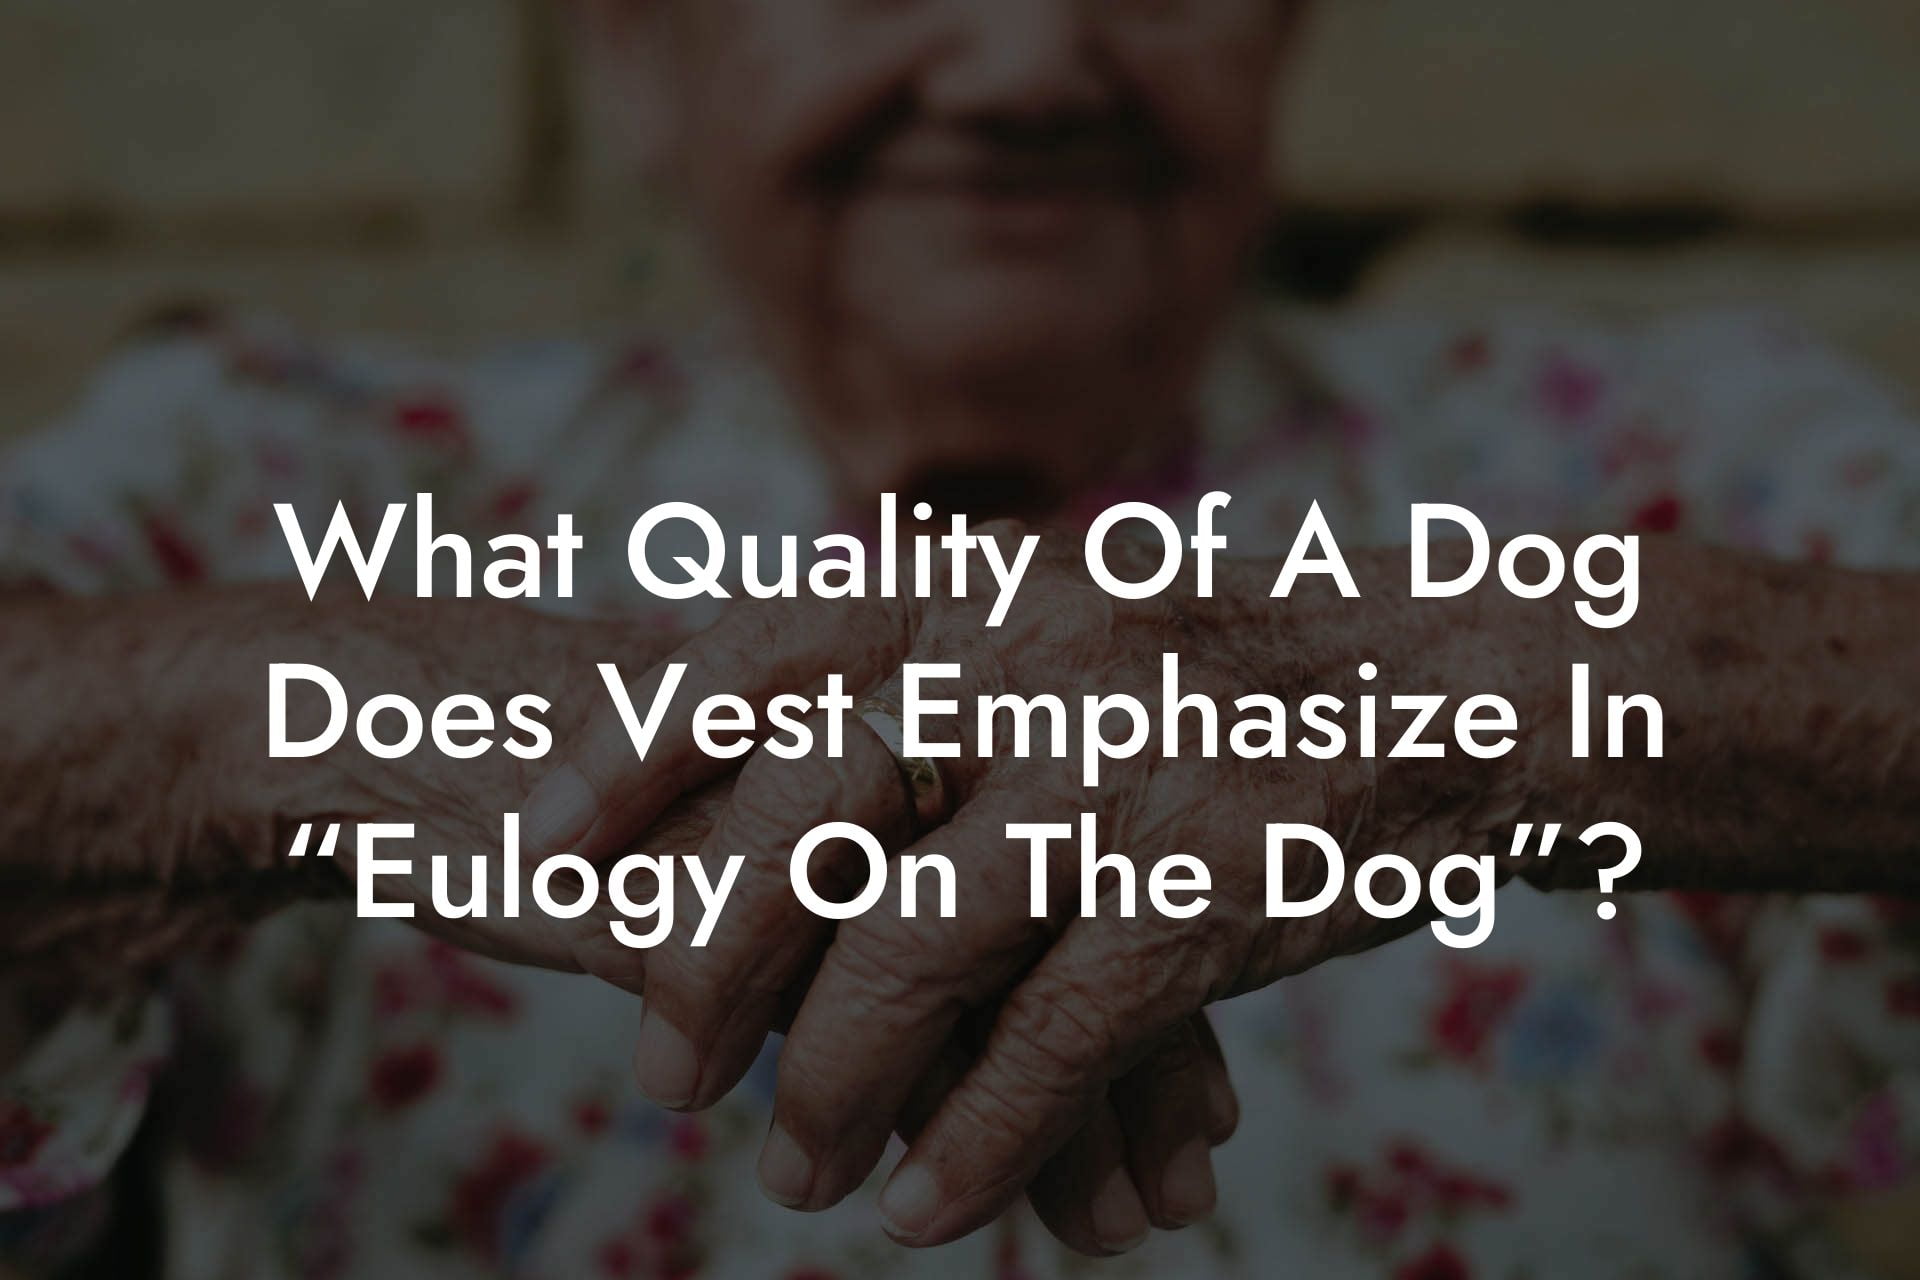 What Quality Of A Dog Does Vest Emphasize In “Eulogy On The Dog”?